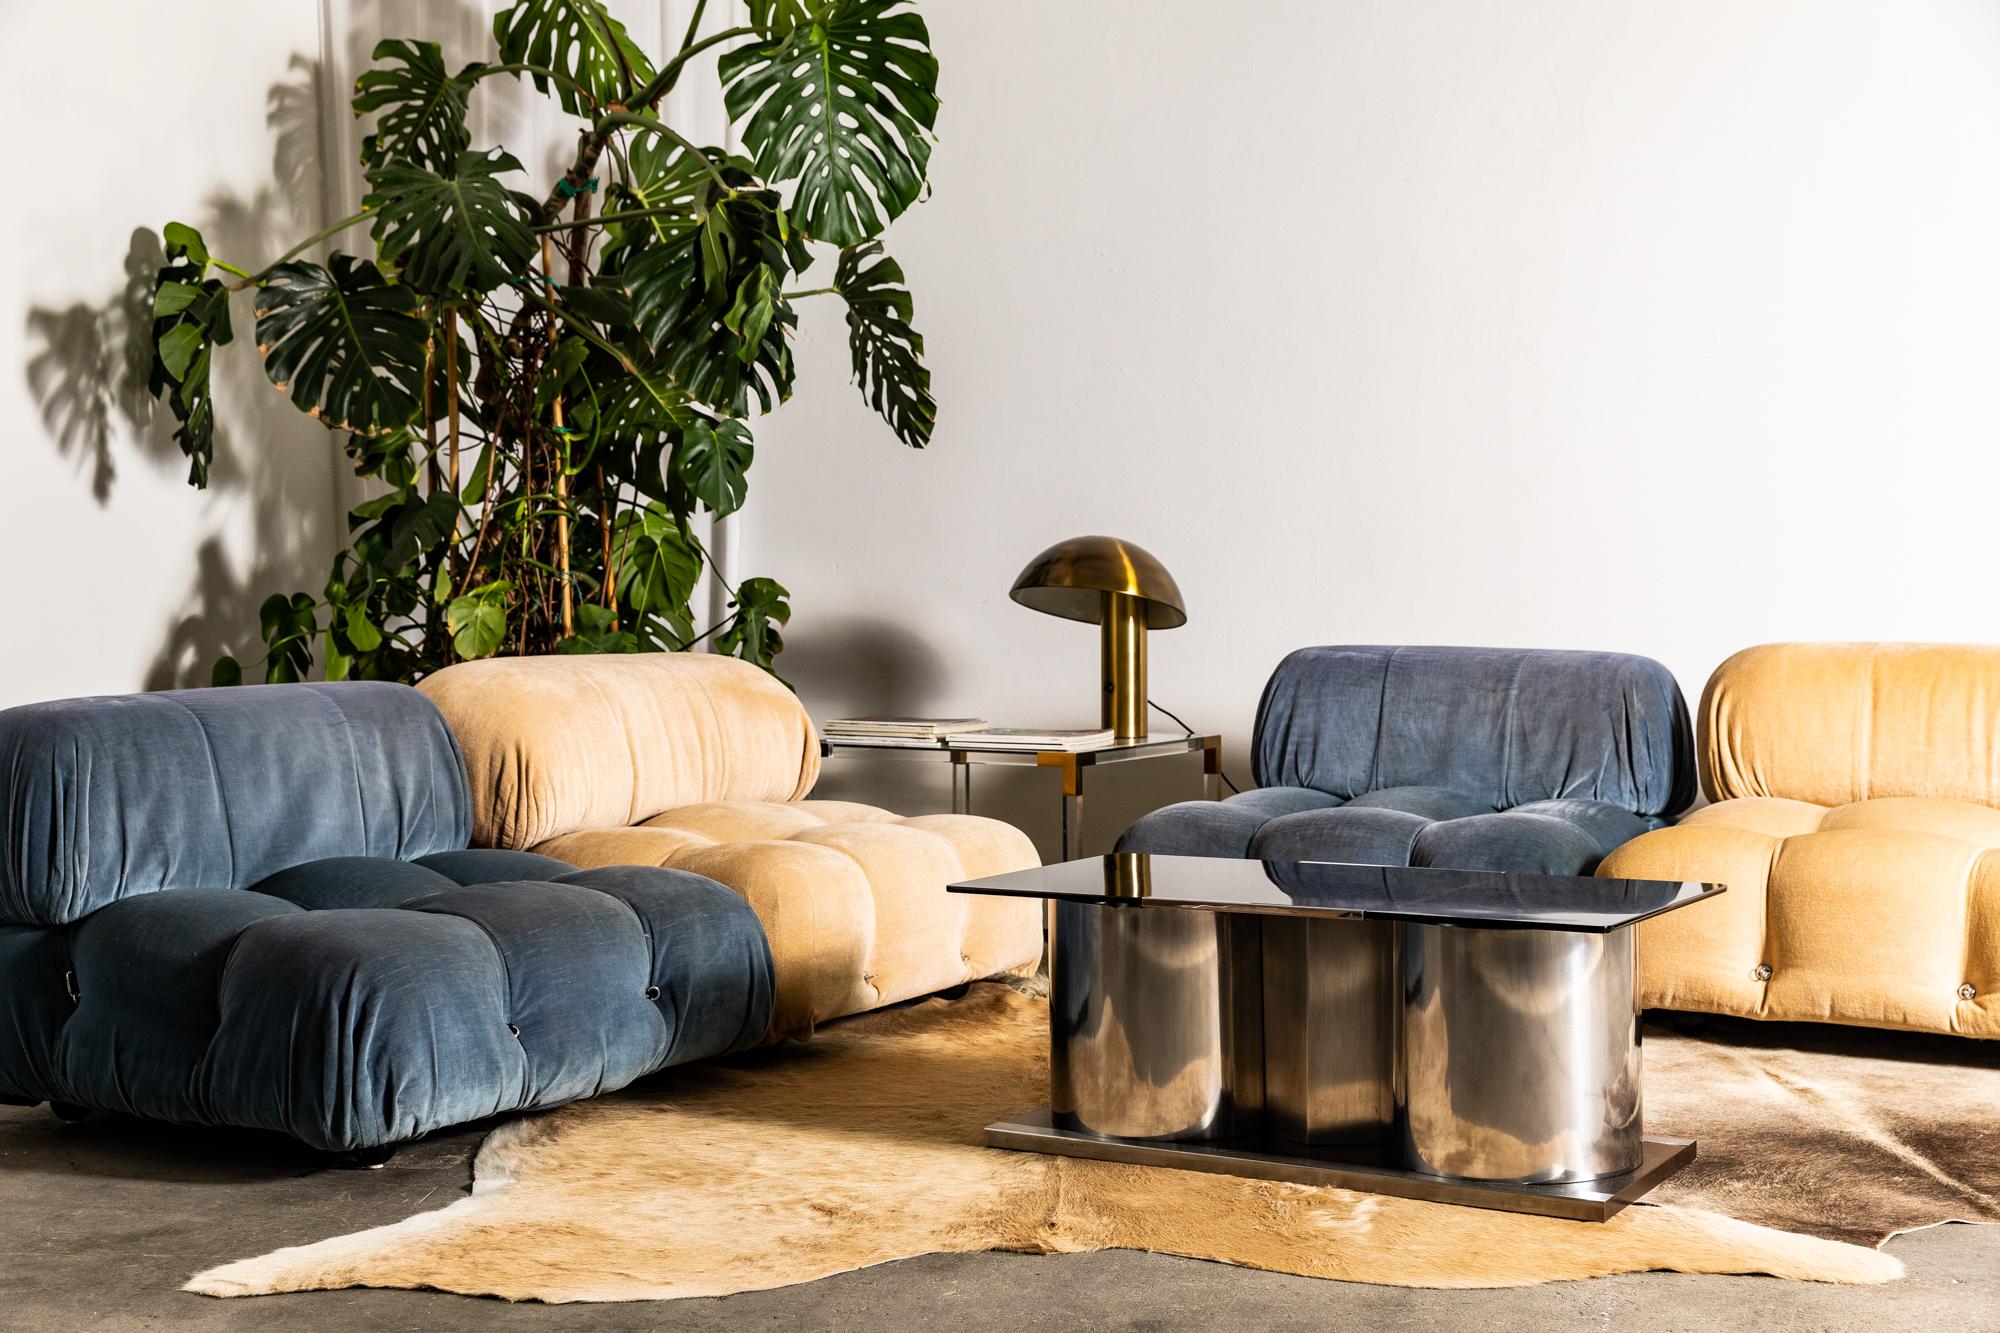 The Camaleonda modular sofa was designed by Italian architect Mario Bellini in 1971. This all original example has four sections and each of the modules attach with rings and carabiners, allowing several configurations. The design became famous